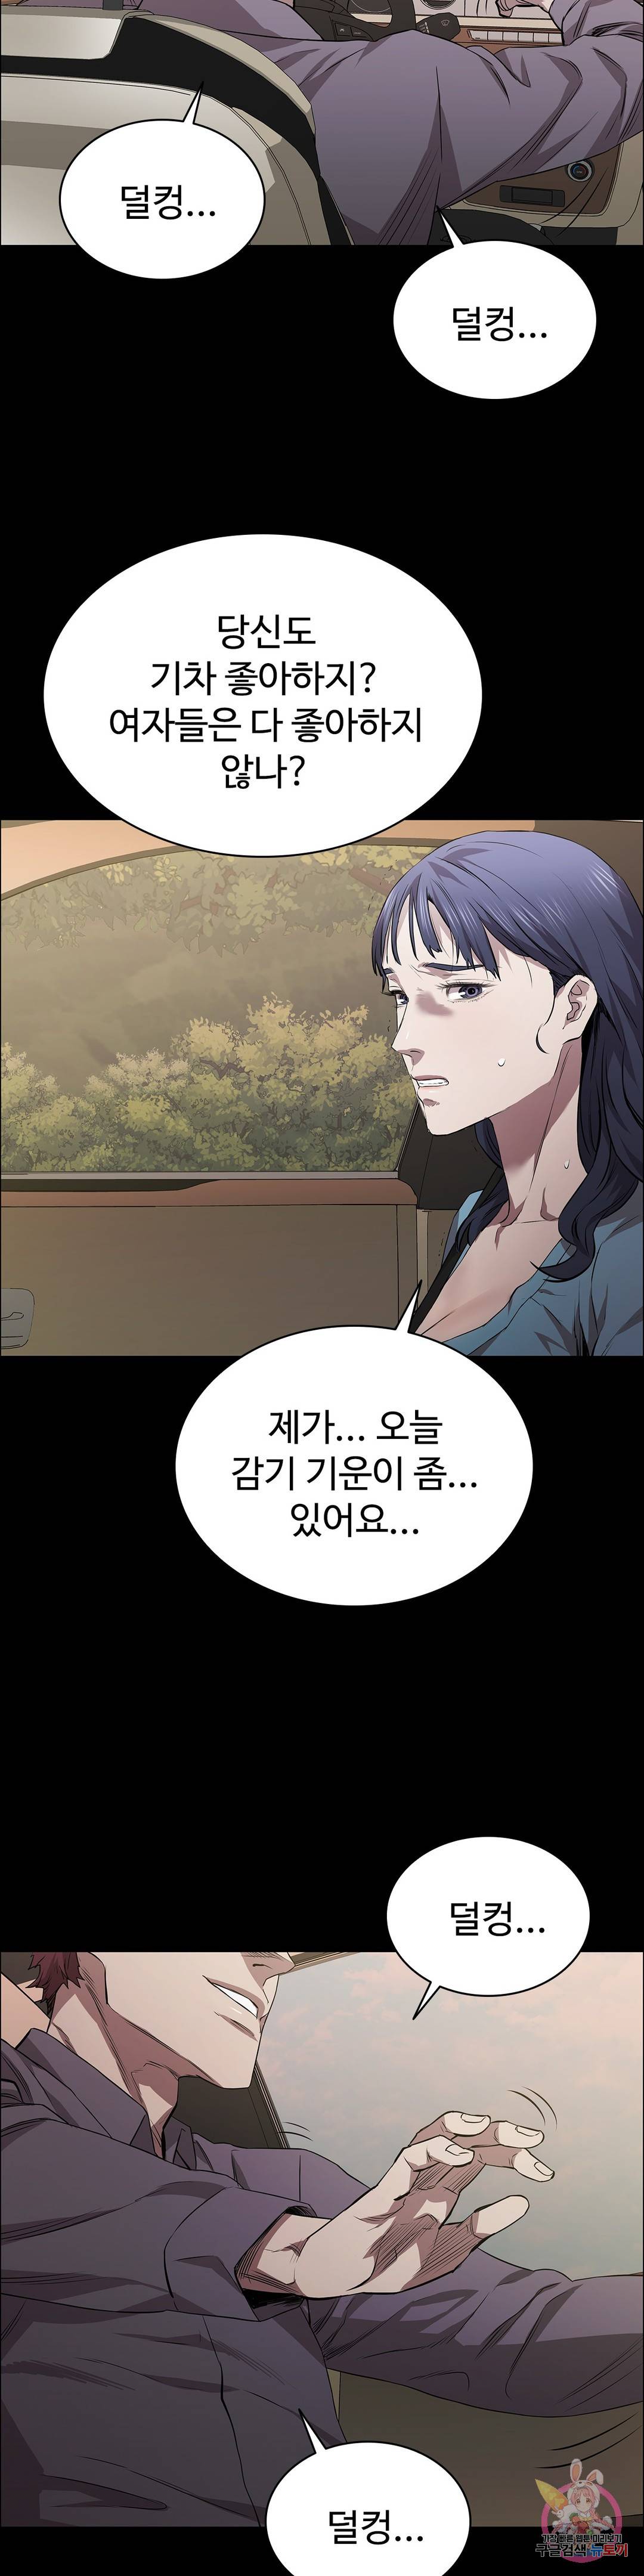 Innocence Beauty Raw - Chapter 20 Page 13